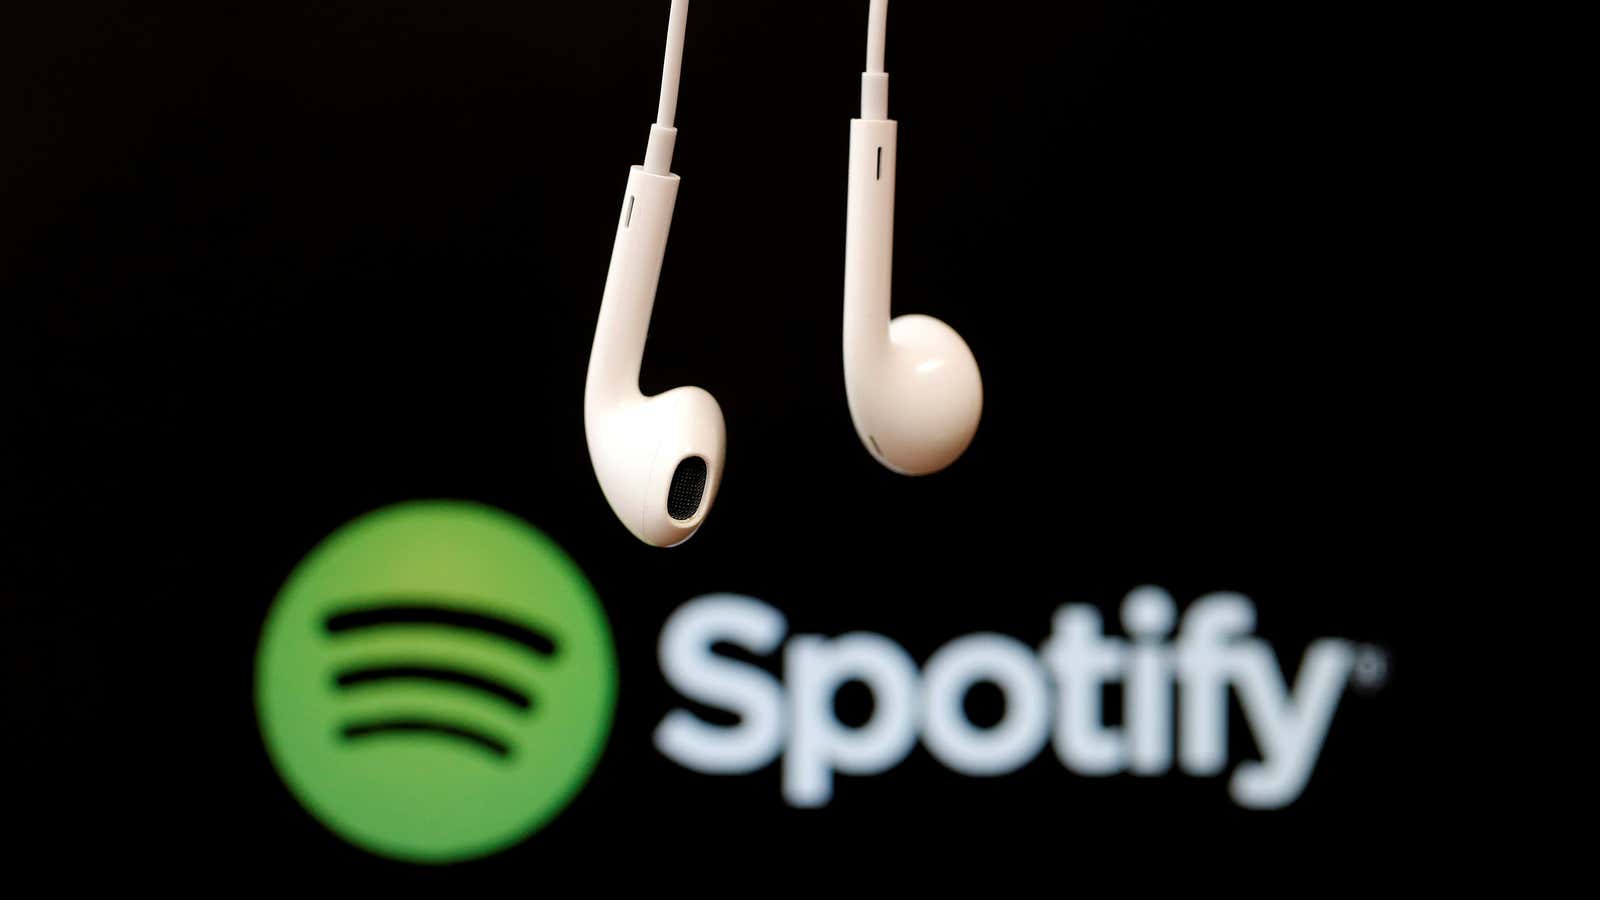 No one should be content with incomplete music streaming data.